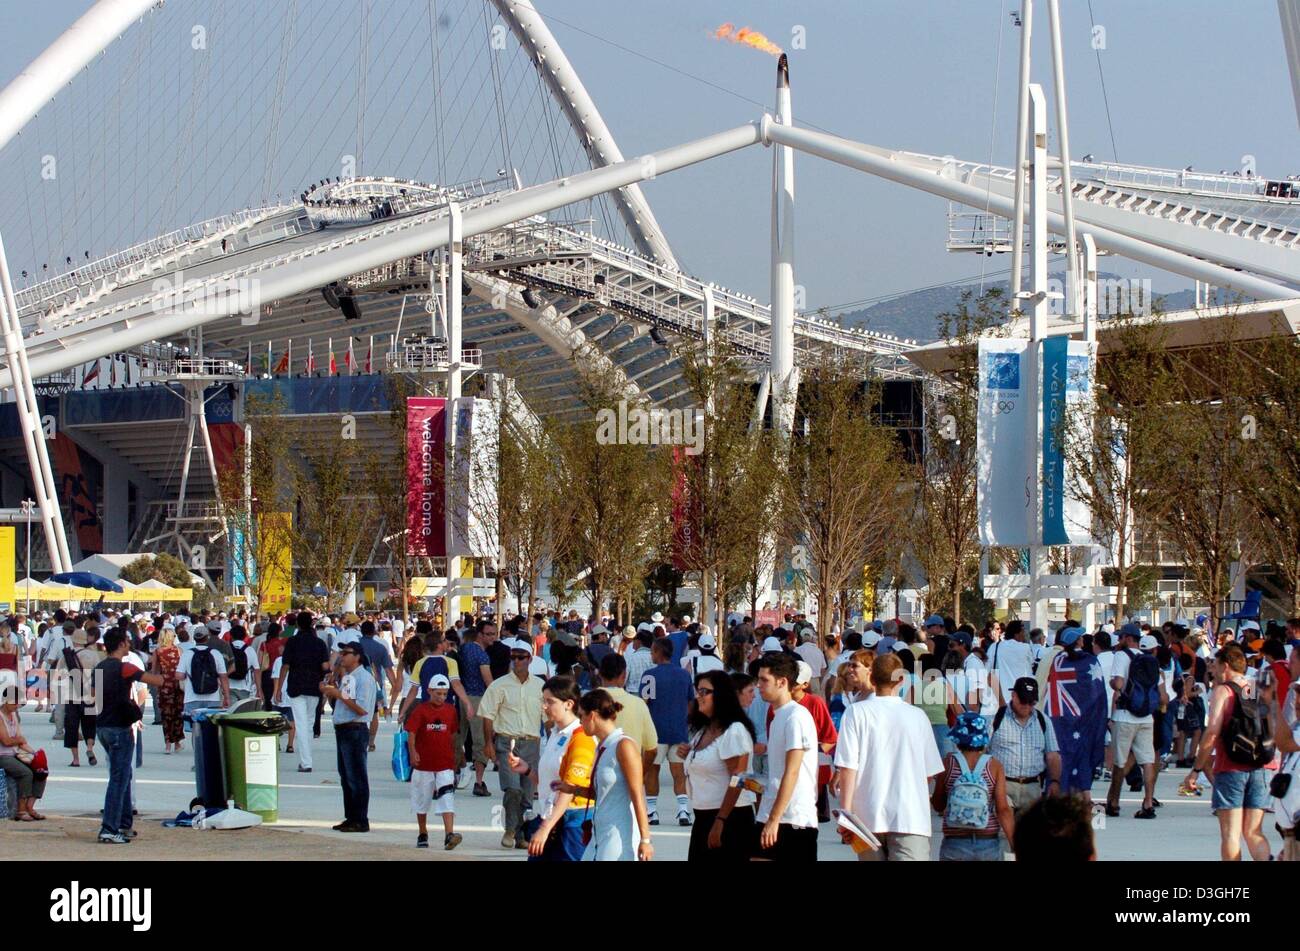 (dpa) - Olympic spectators fill the walkways in the Olympic Complex as they get ready to watch the evening action in the Olympic Stadium (background), in Athens, Sunday 22 August 2004. The weekend events with two of the main gigs, the women's and the men's 100m finals, showed an almost sold out Stadium for the first time so far. Organizers complain about a lack of spectators in mos Stock Photo